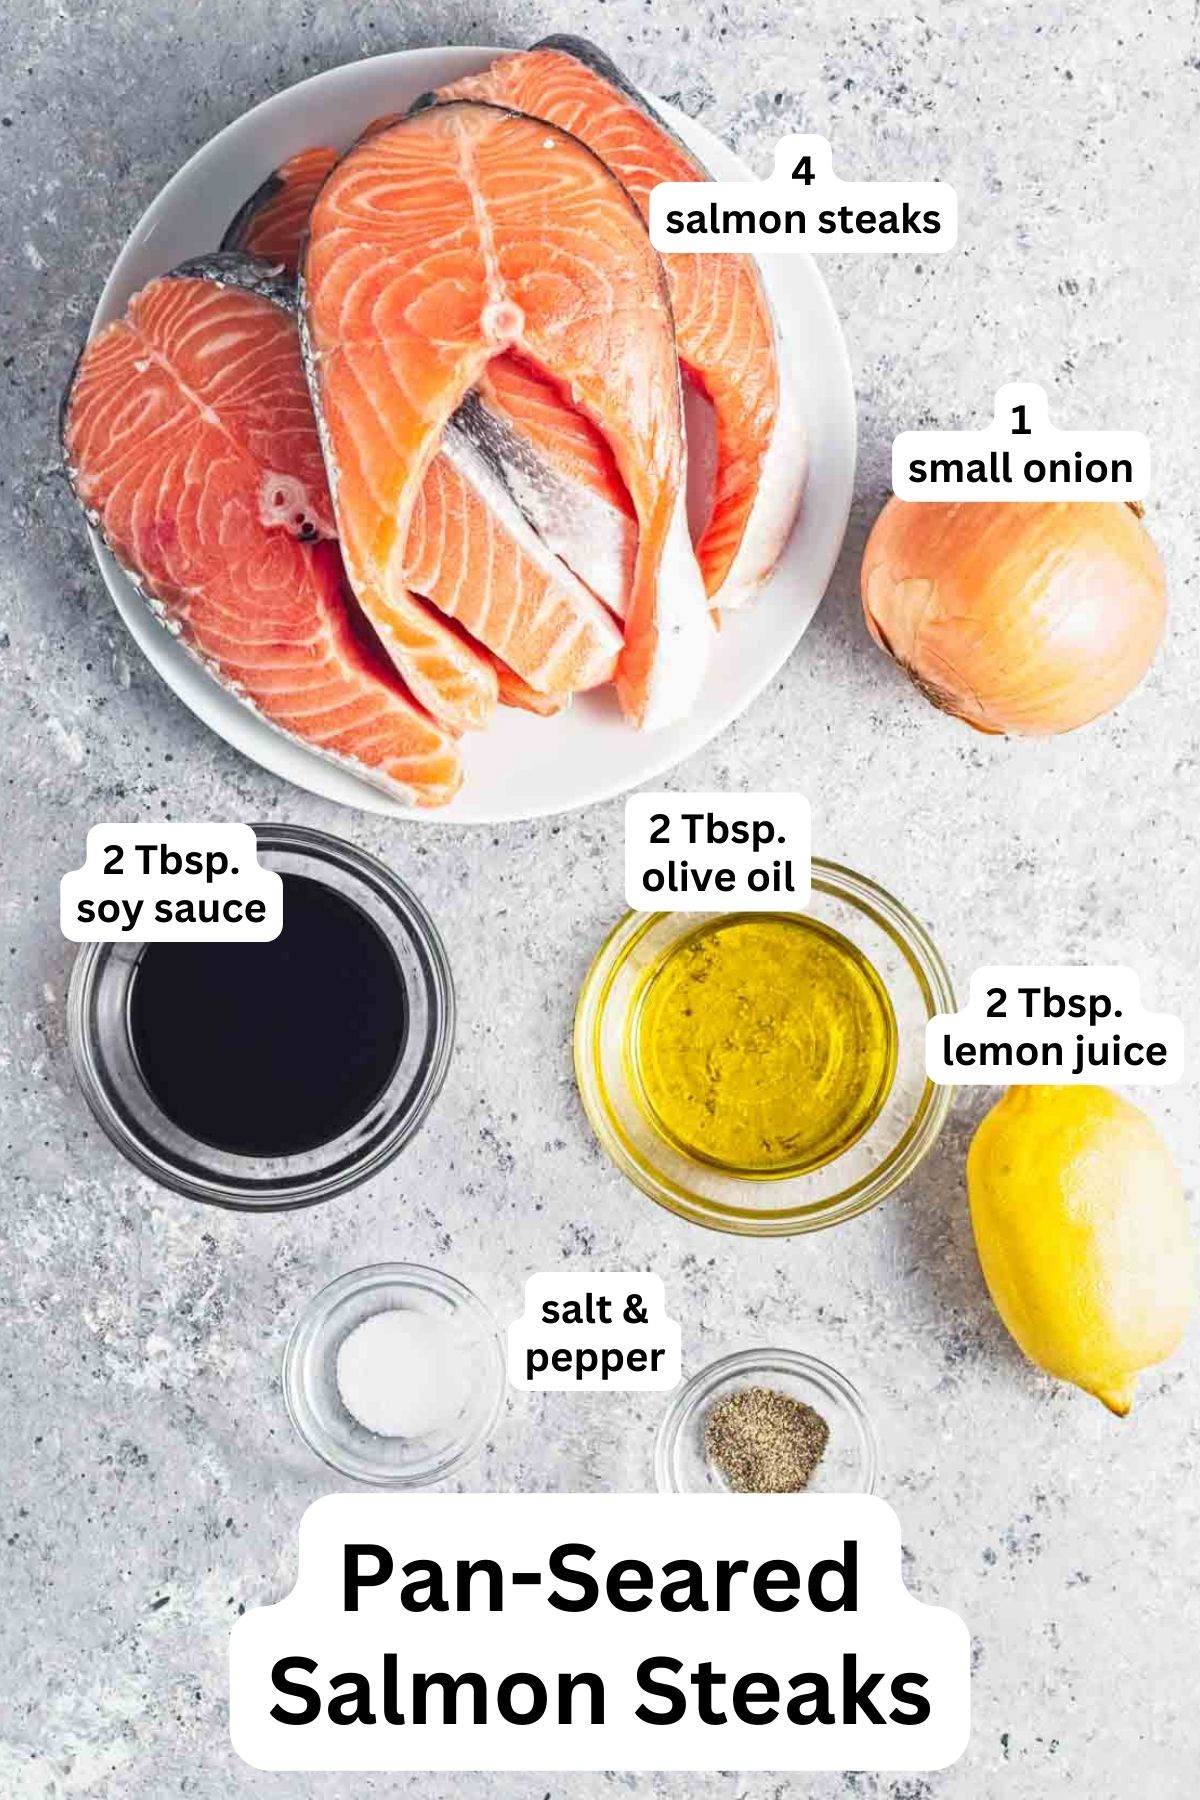 Ingredients to cook salmon steaks with soy sauce.